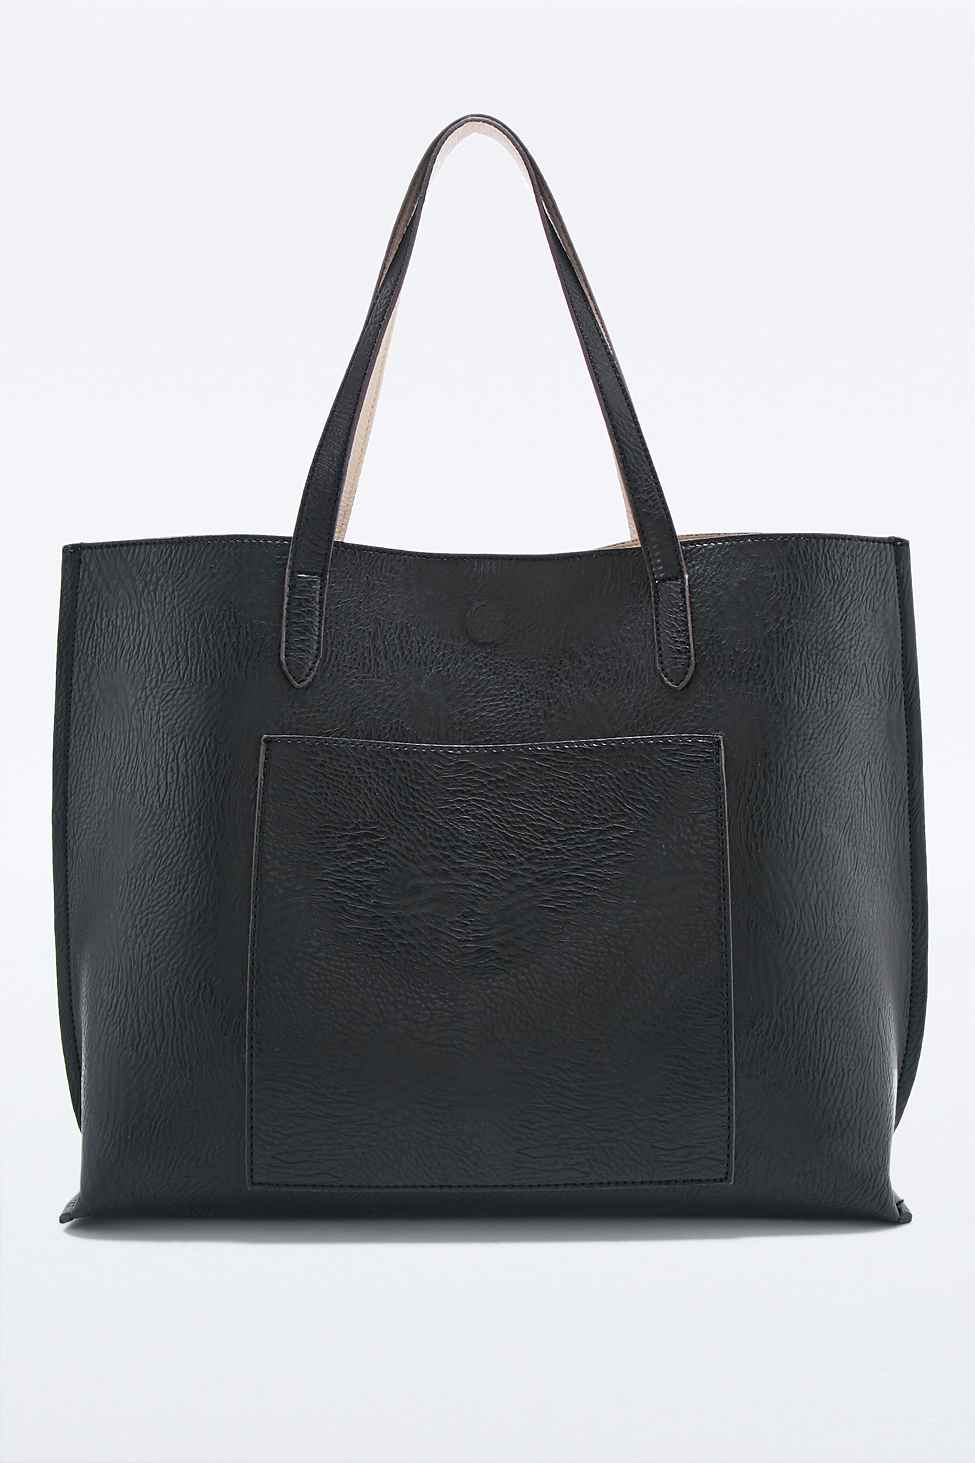 Urban outfitters Reversible Vegan Leather Pocket Tote Bag In Black And Ivory in Black | Lyst